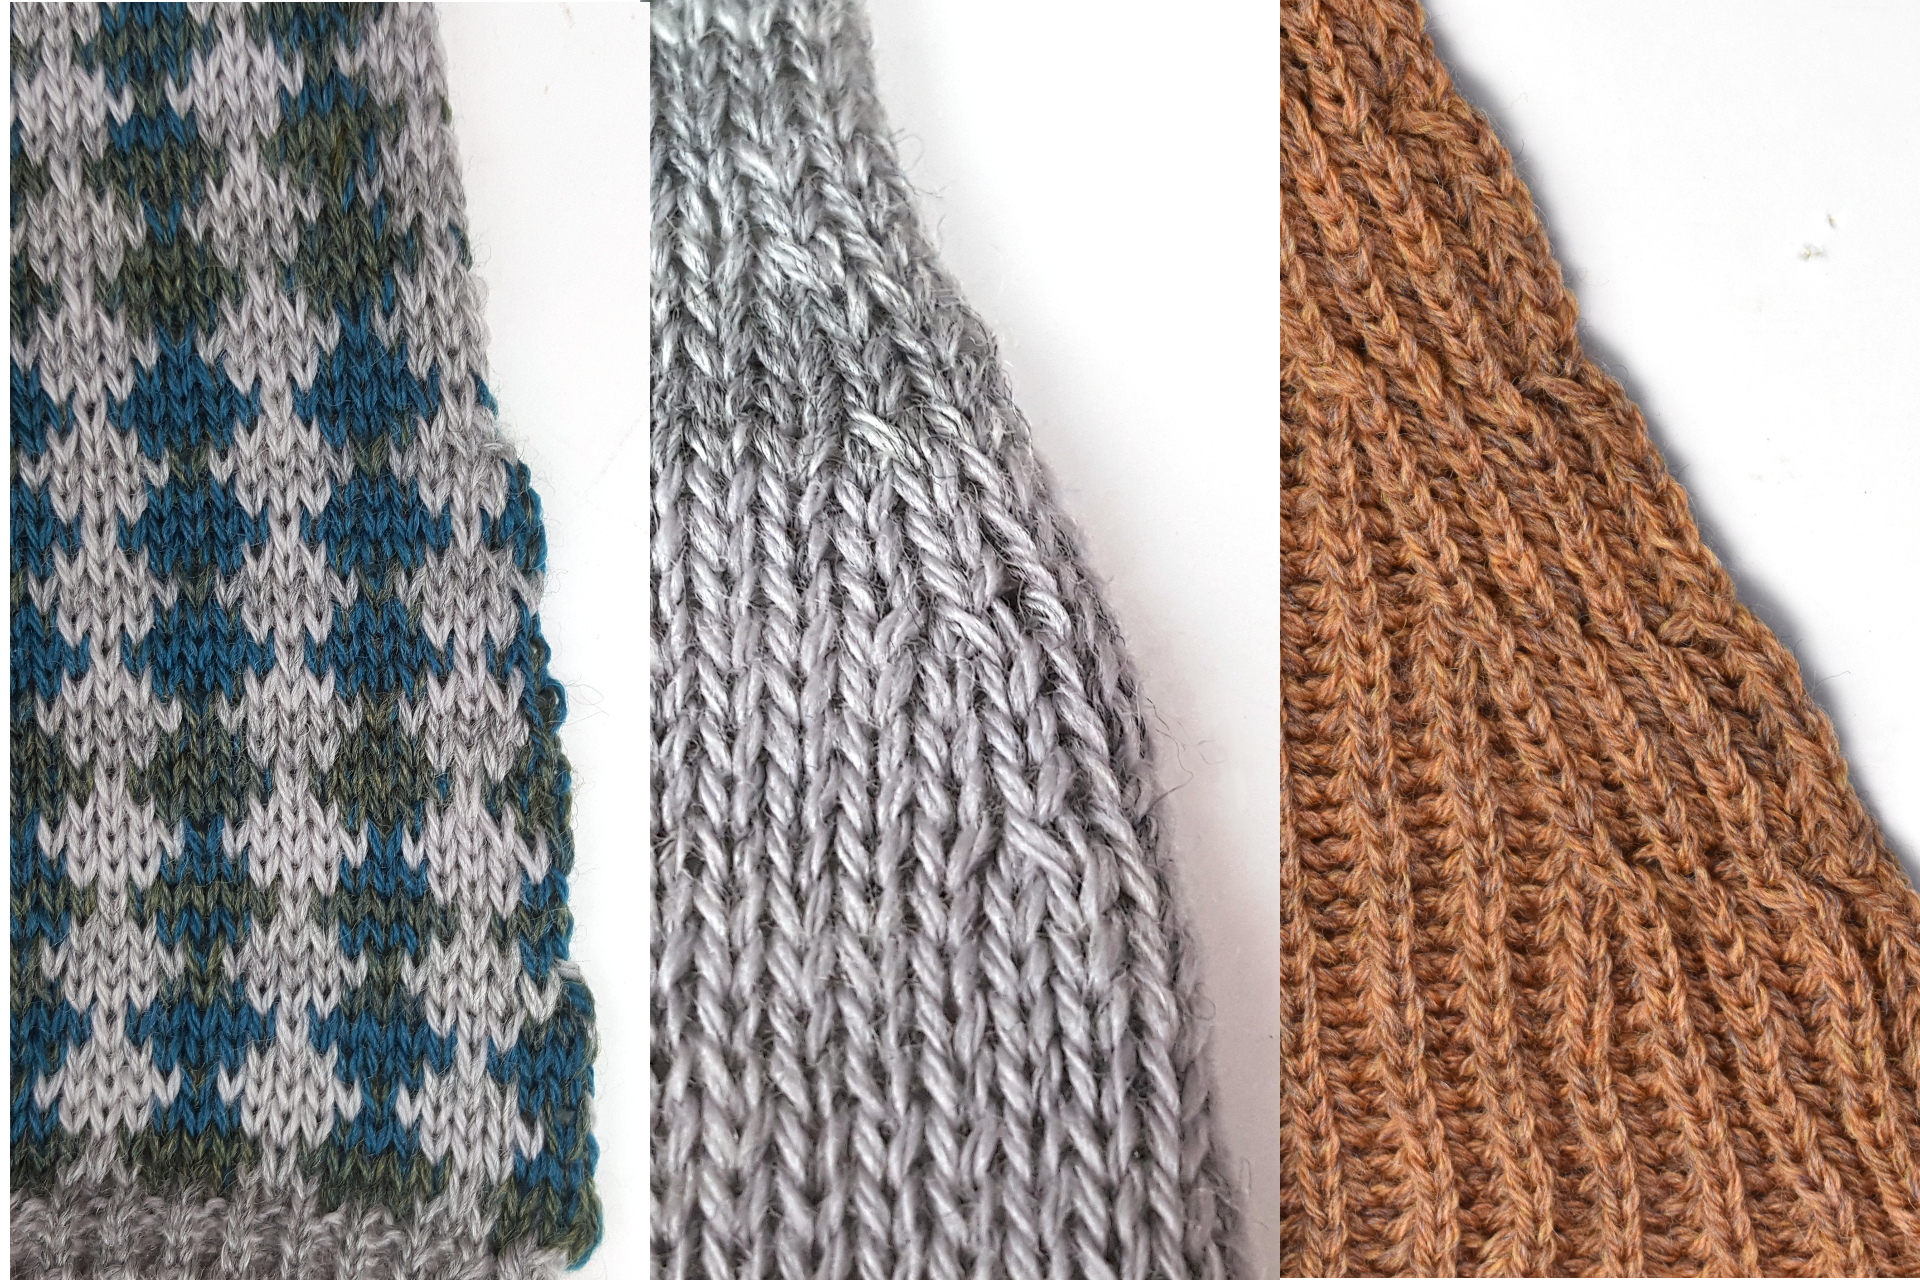 Three examples of knitted decreases